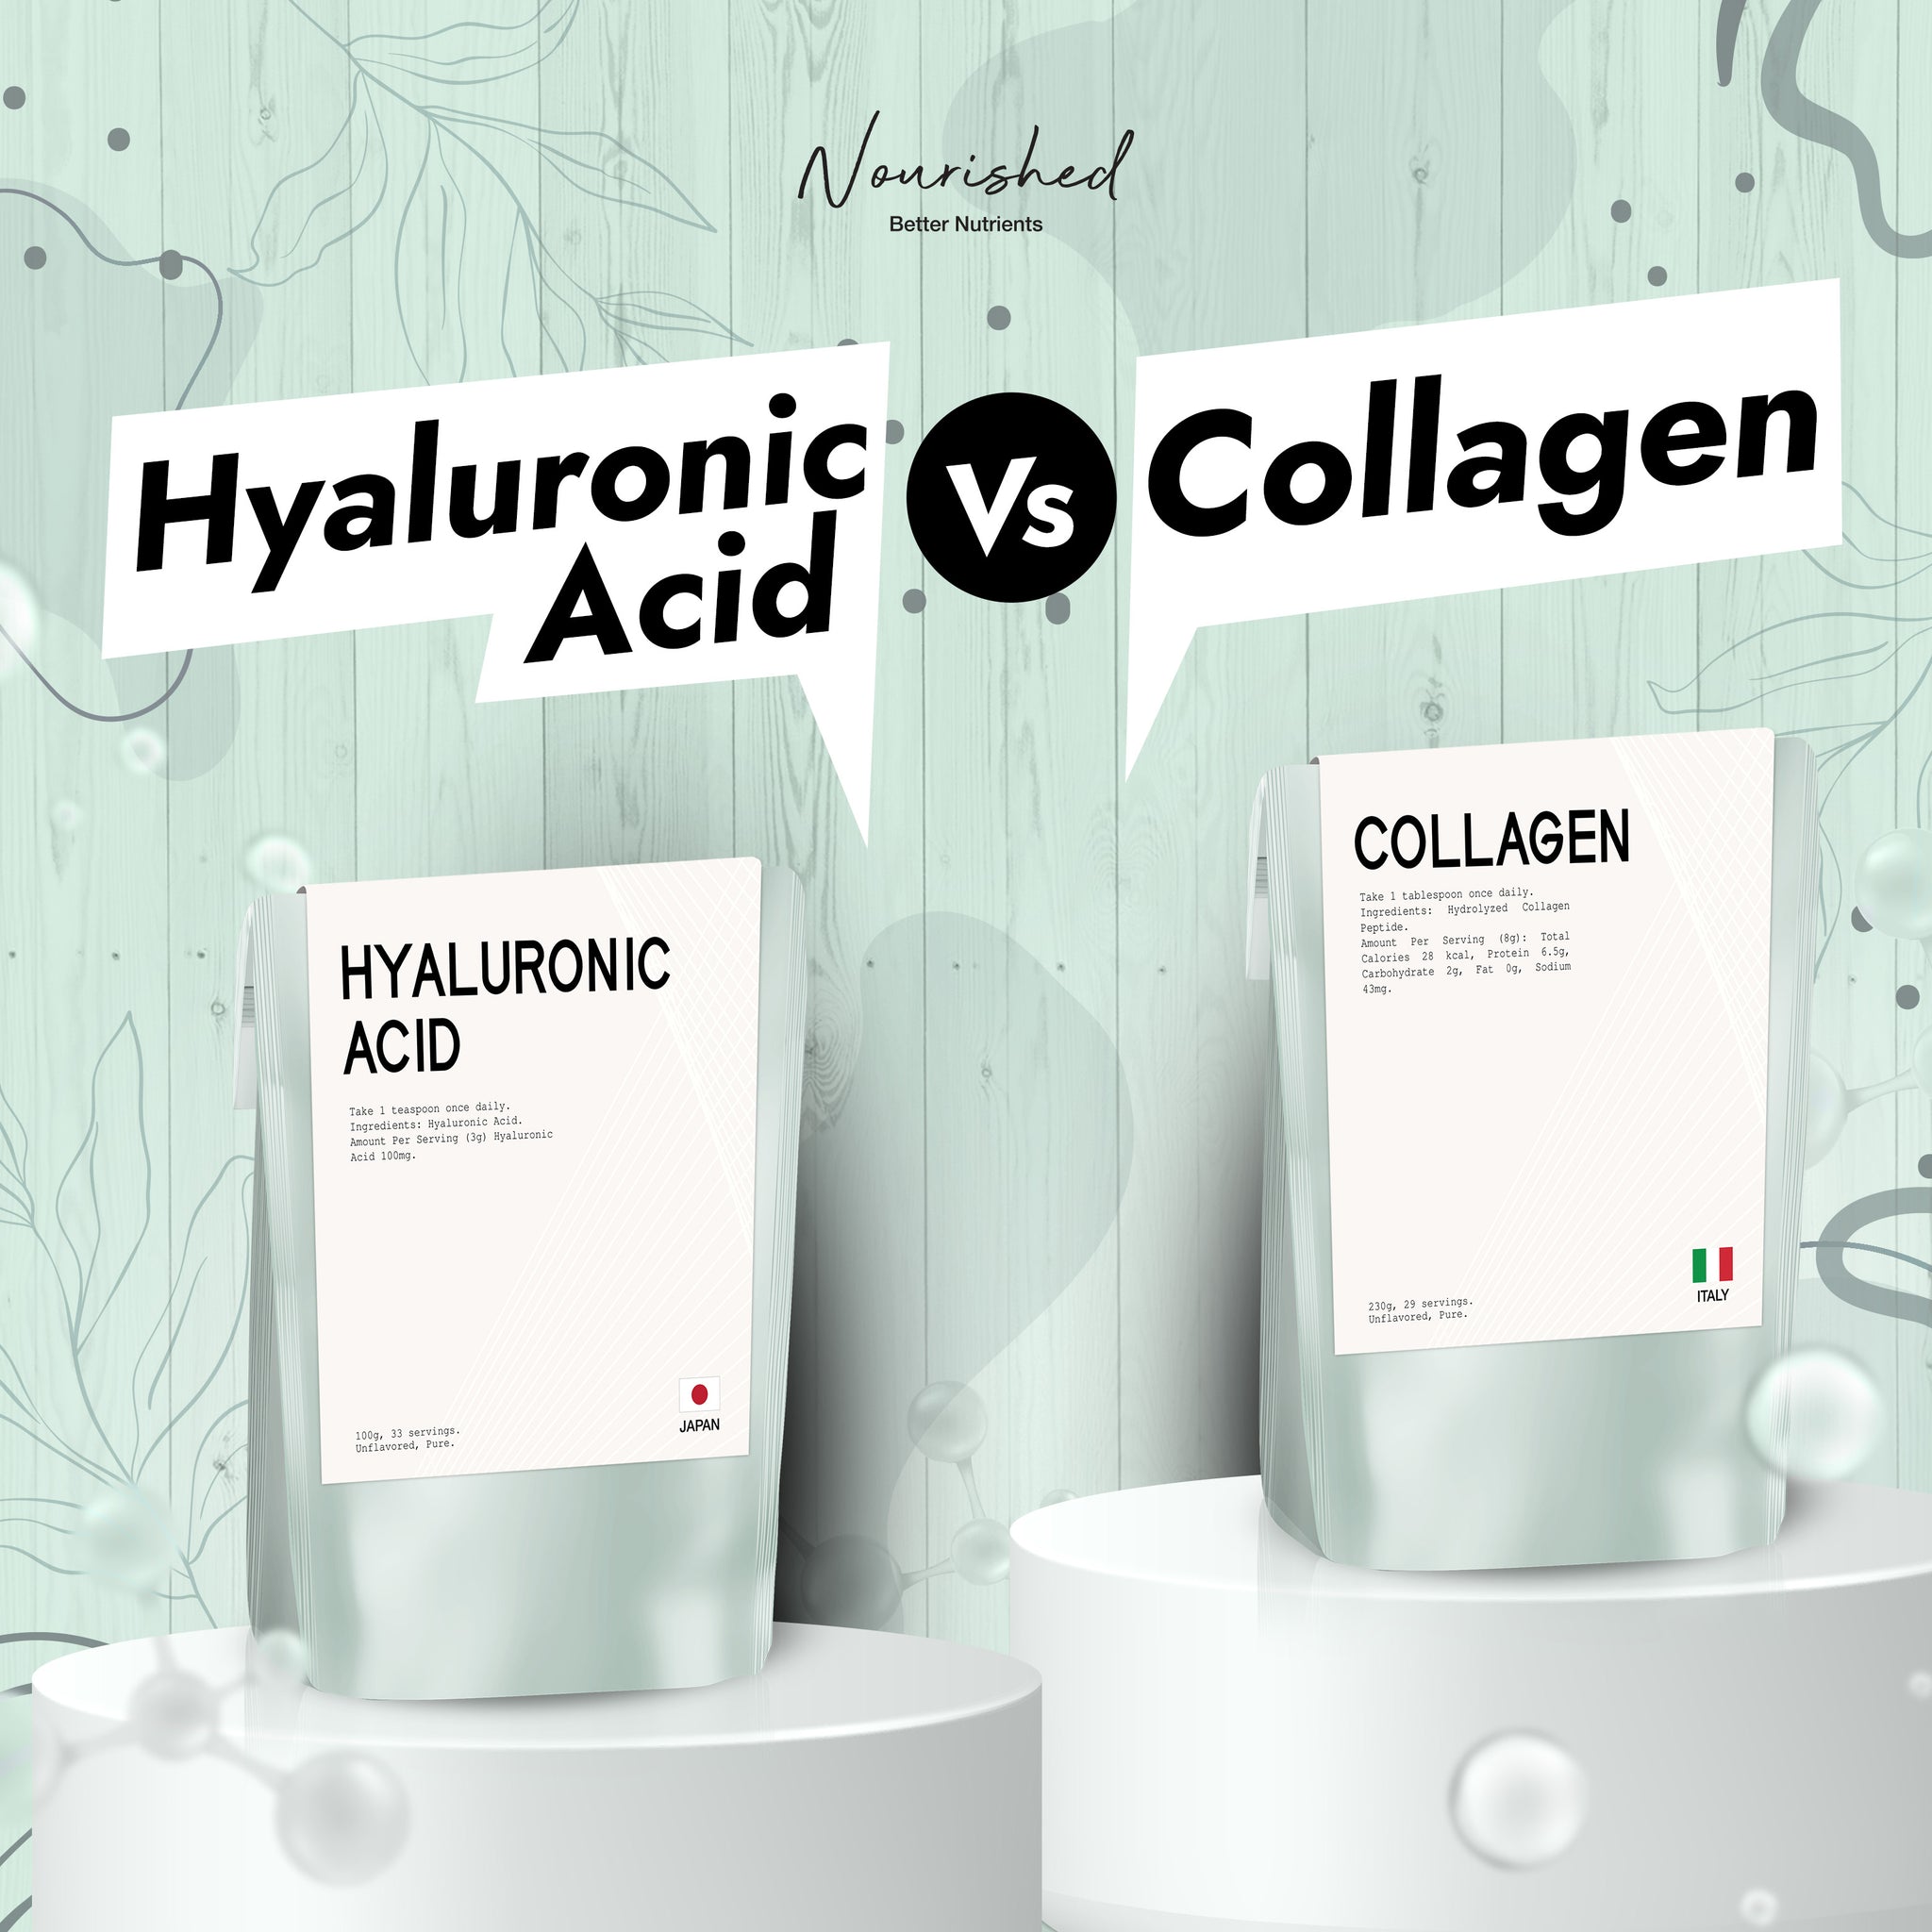 Hyaluronic Acid Vs Collagen – Which is Better for Our Skin?